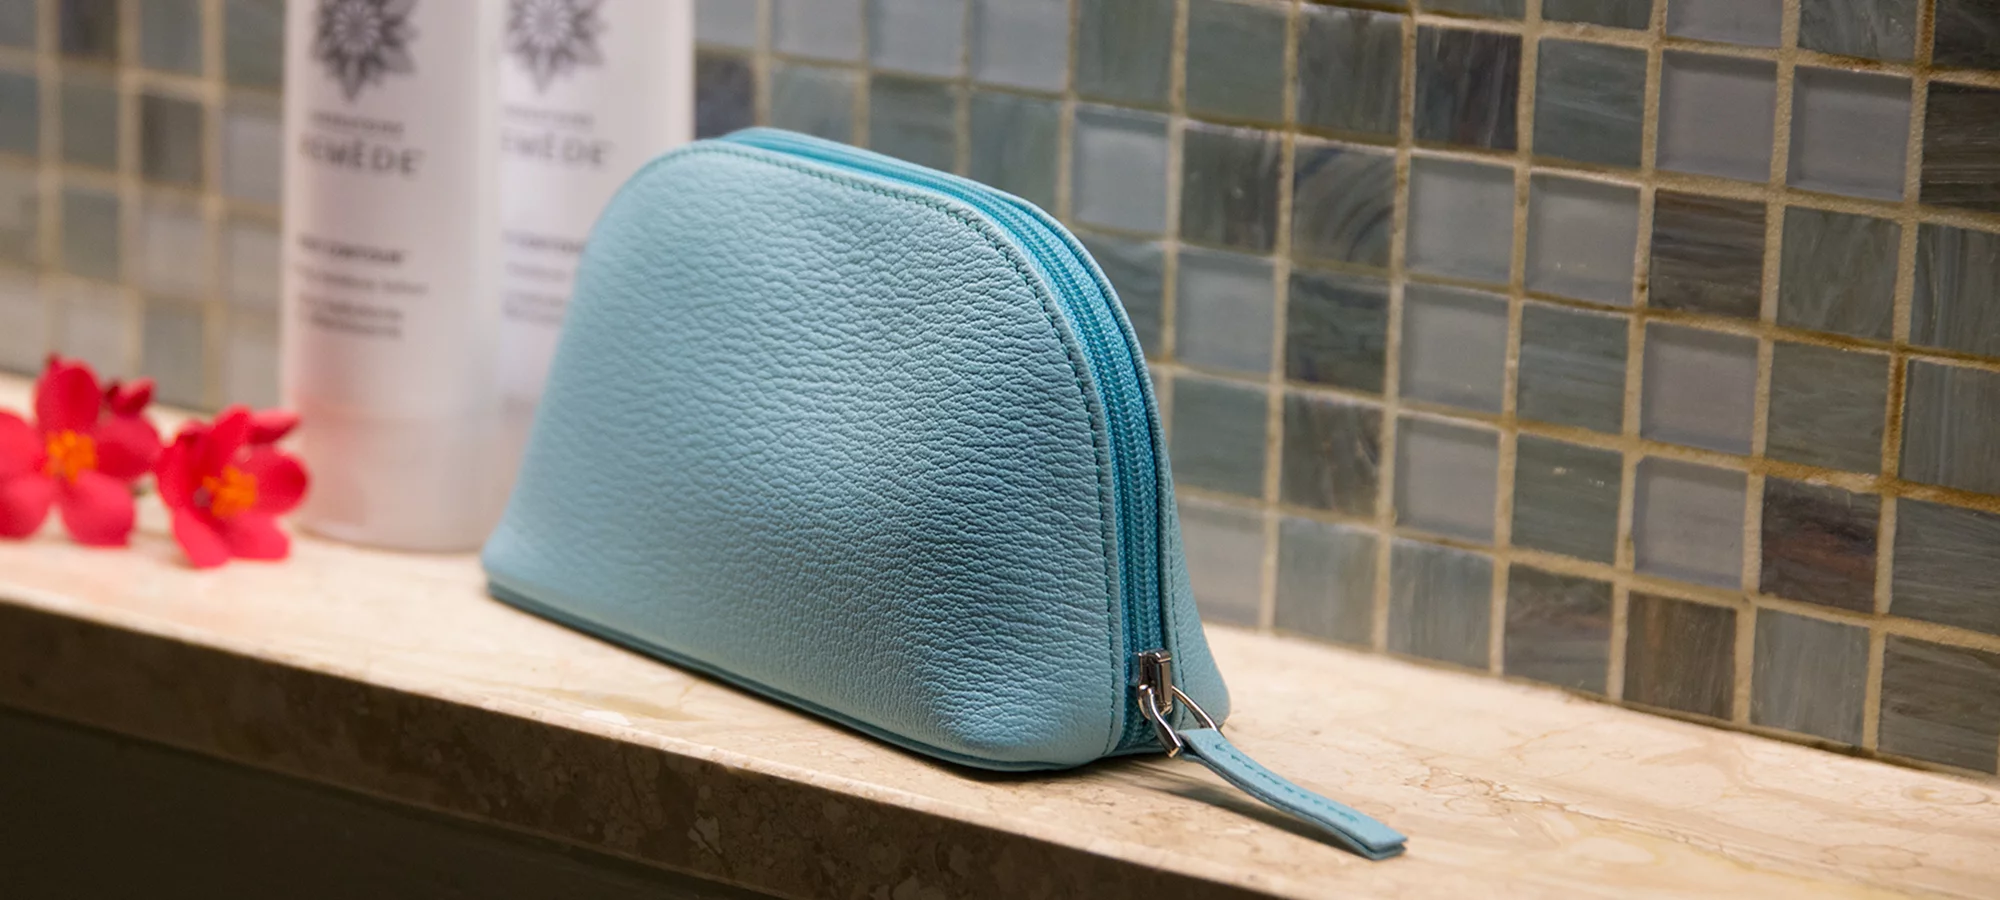 Makeup bag (16 x 8.5 x 5.5 cm) - Turquoise - Smooth Leather